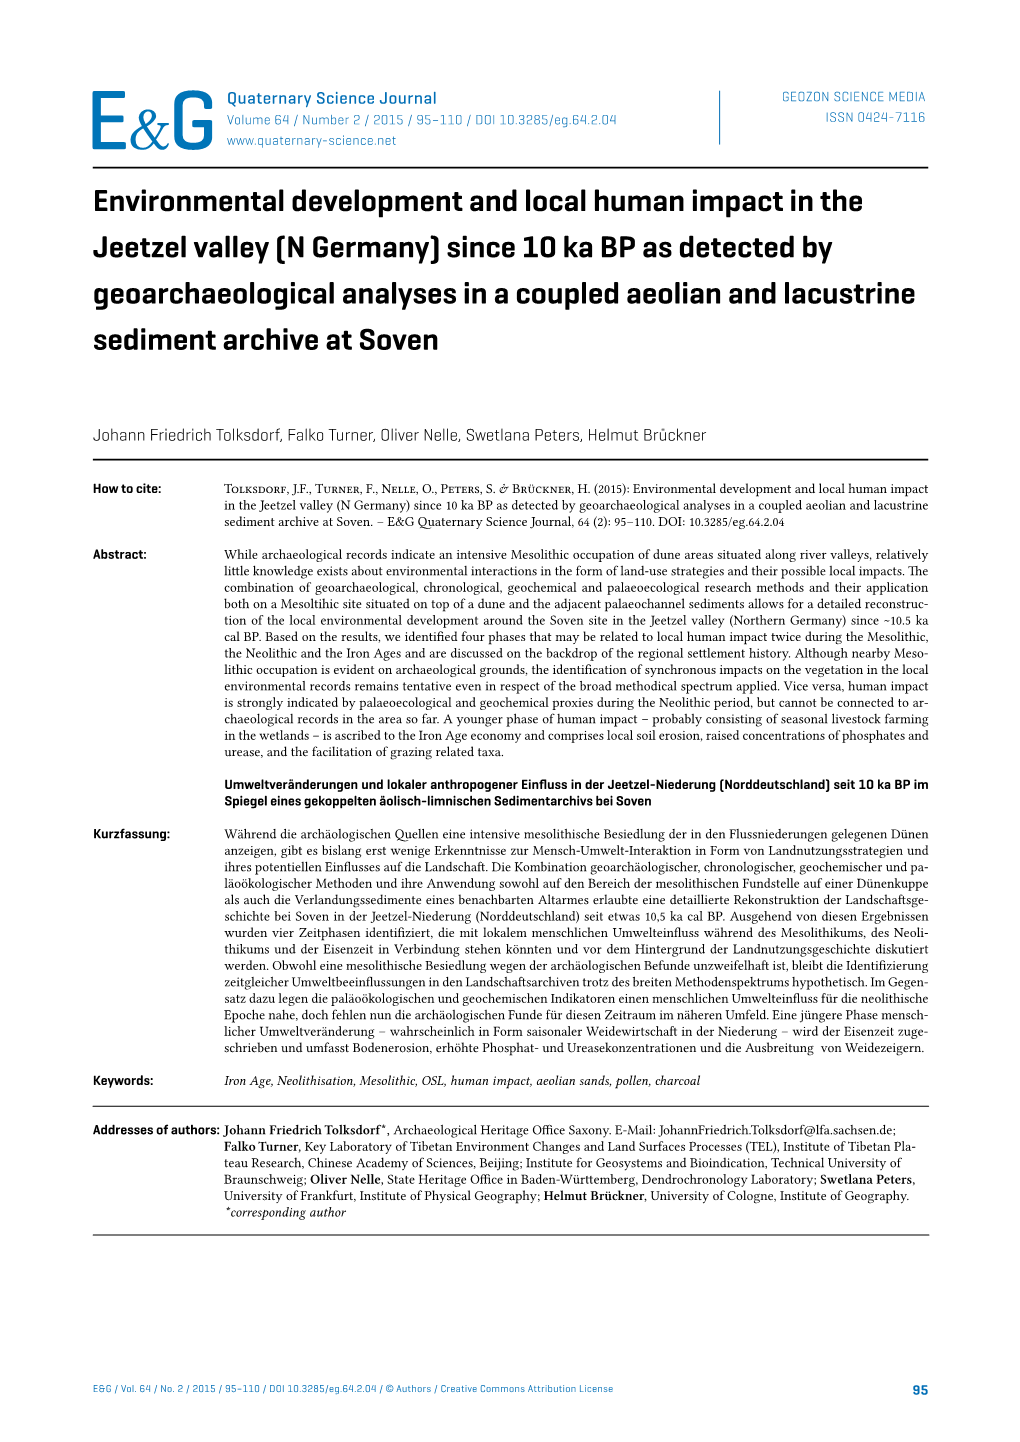 Environmental Development and Local Human Impact in the Jeetzel Valley